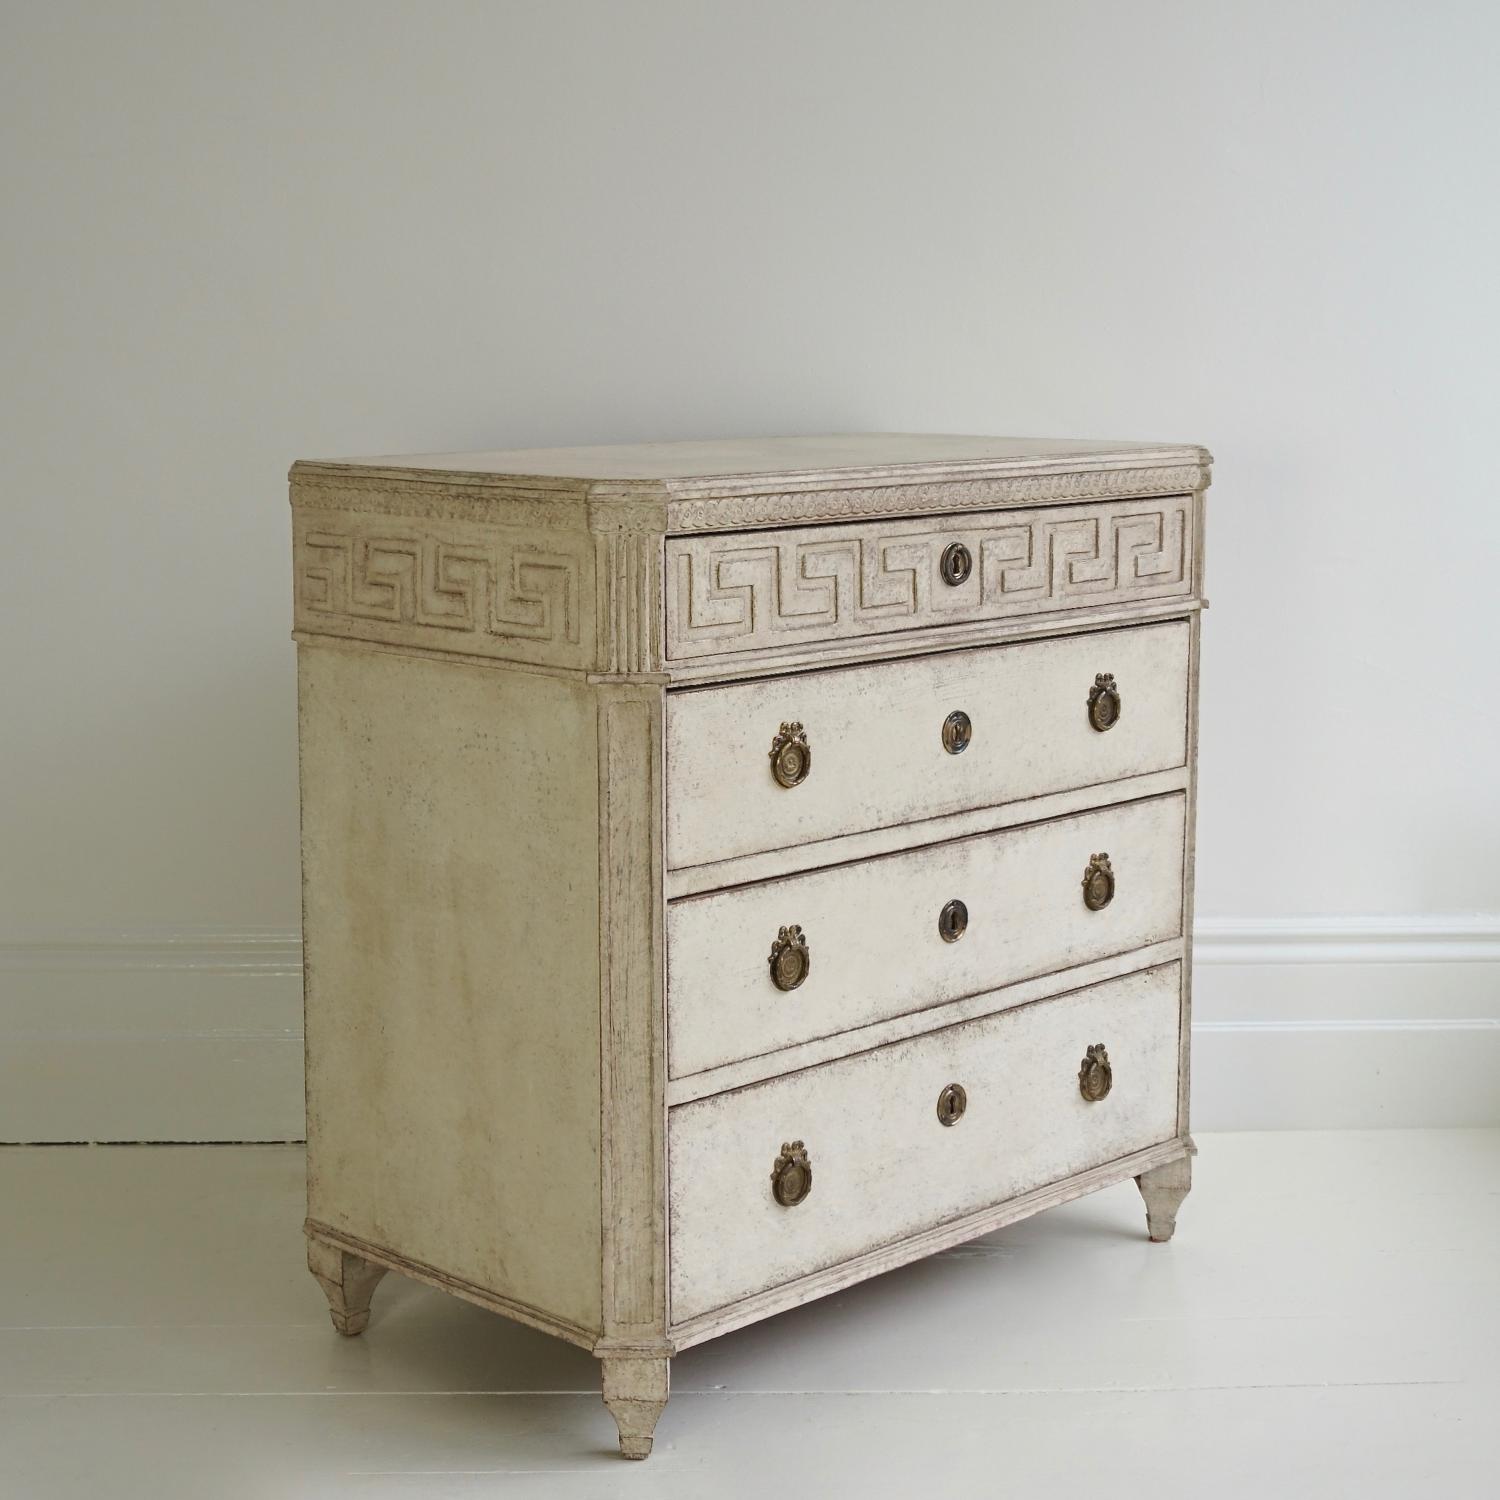 RICHLY CARVED SWEDISH GUSTAVIAN STYLE CHEST